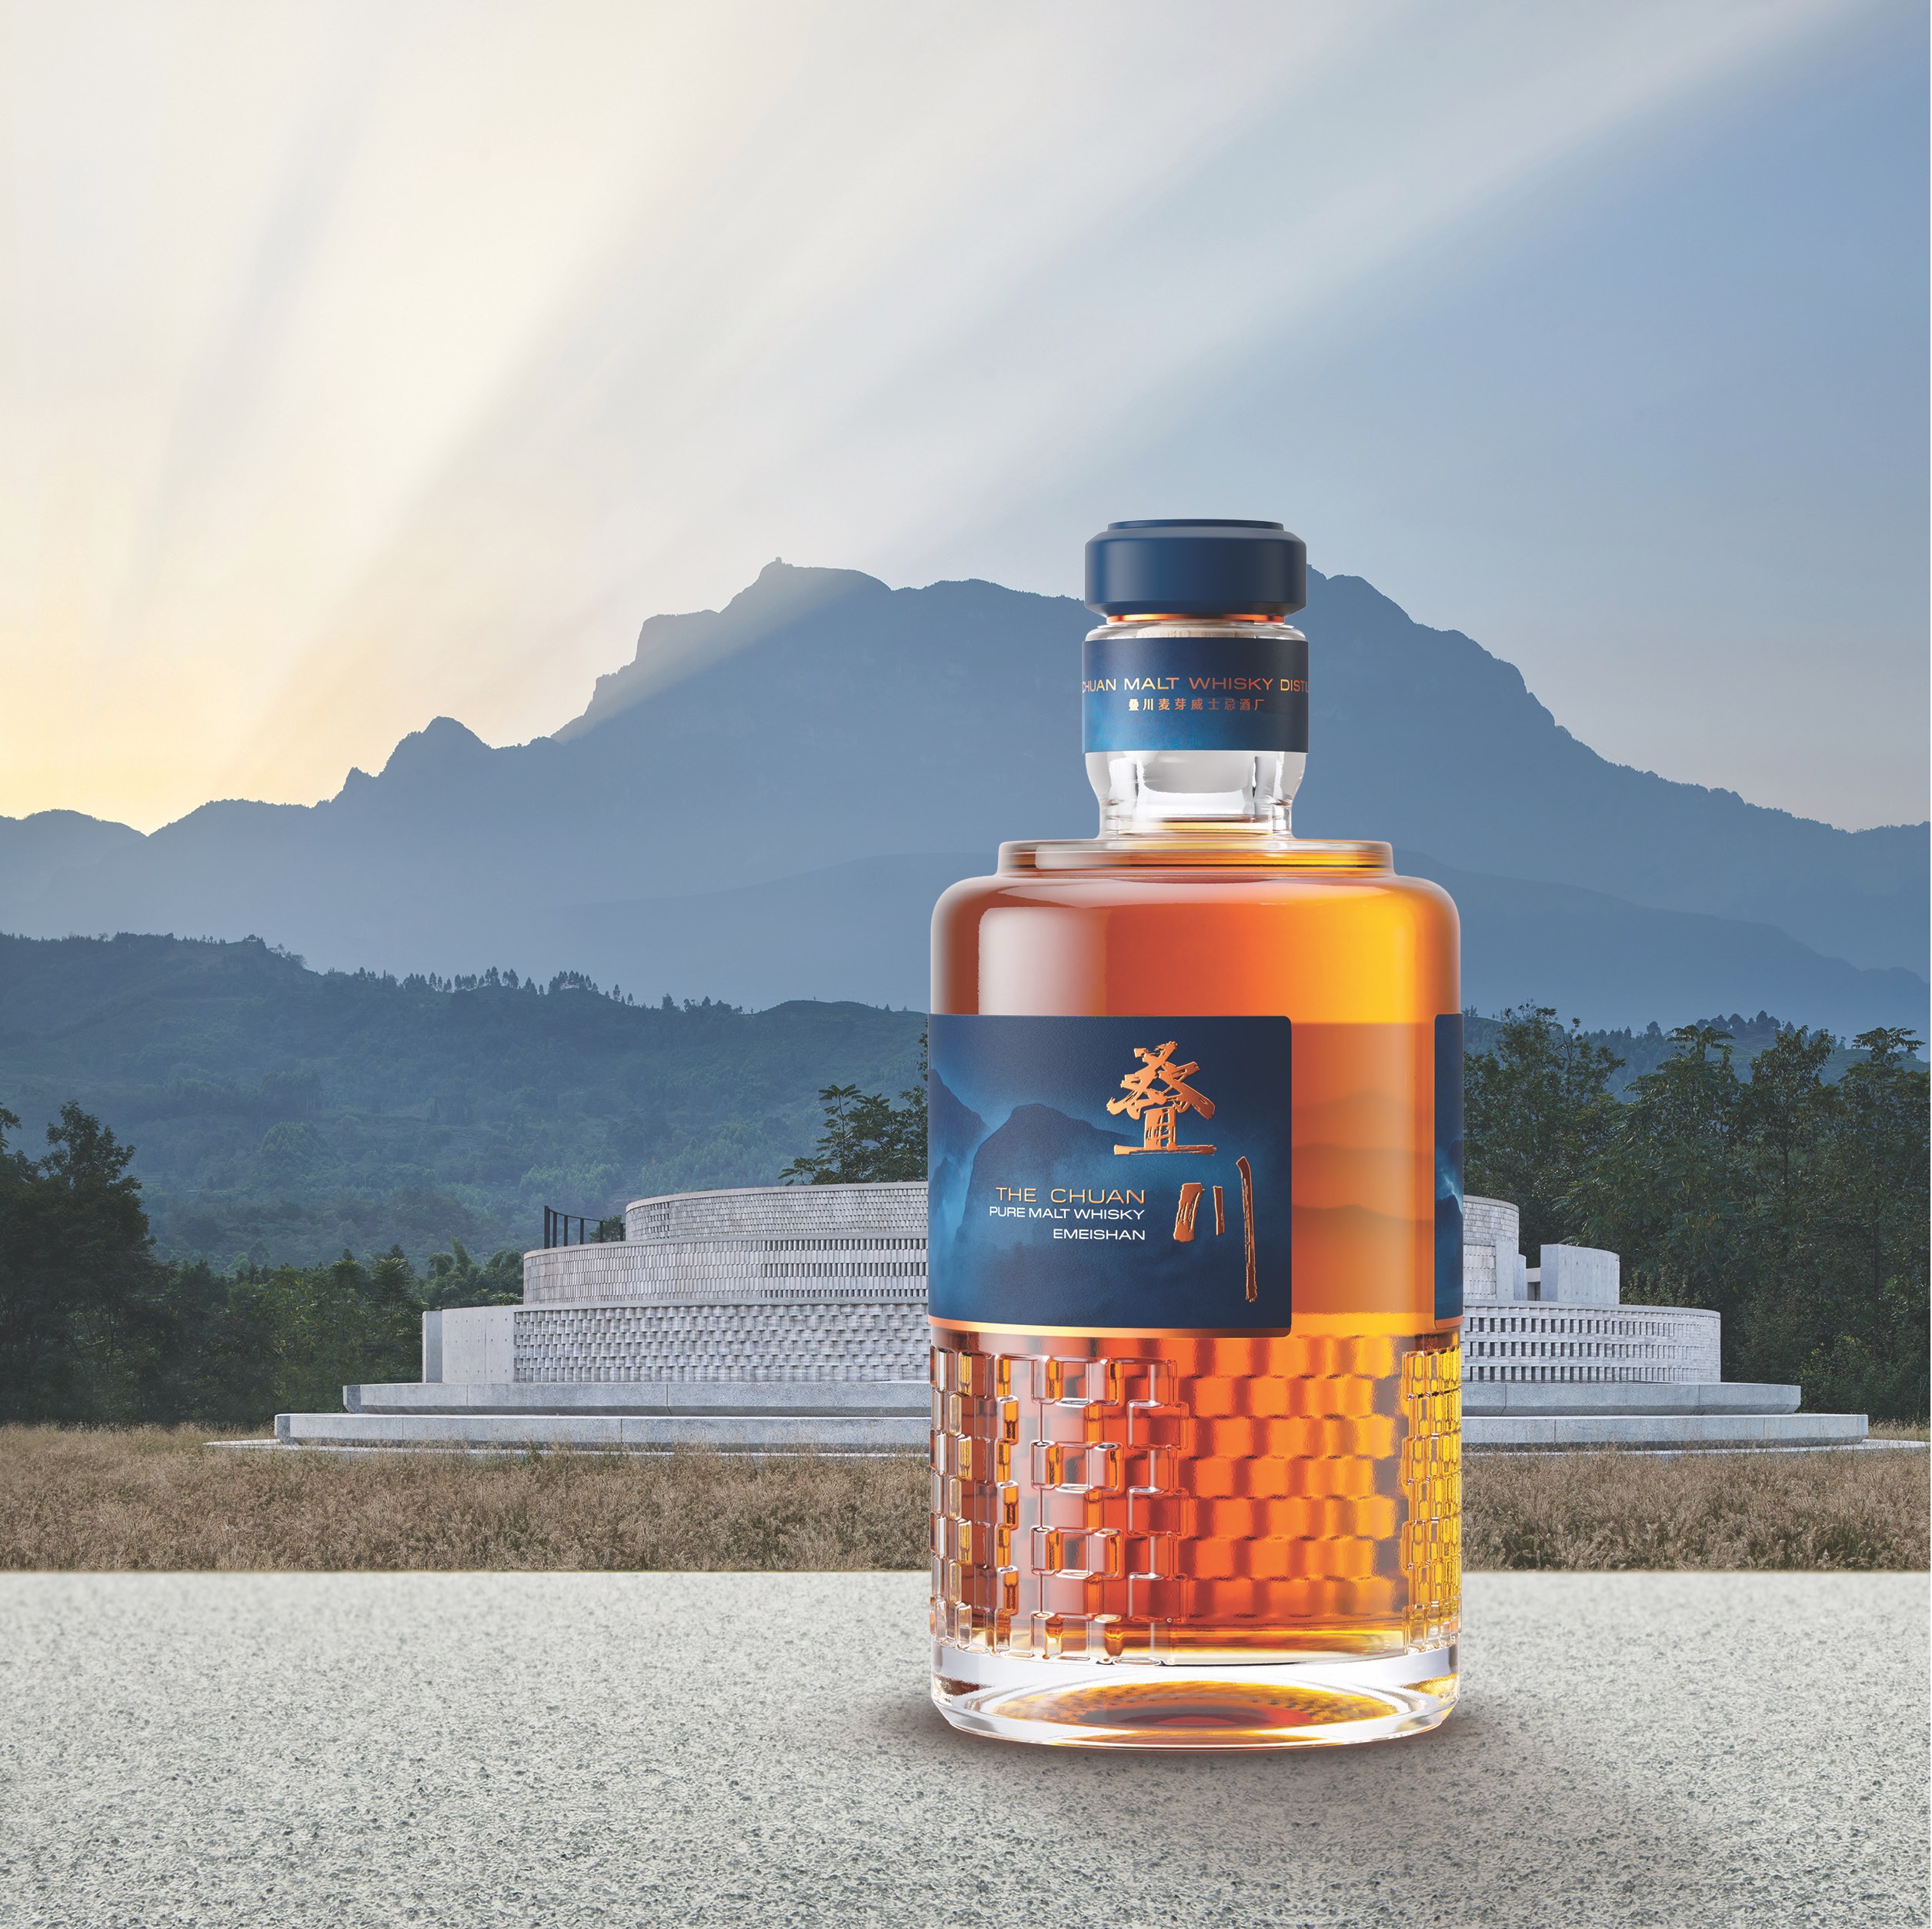 Pernod Ricard Introduces the Chuan: China’s First Prestige Malt Whisky, With Packaging Design by Nude Brand Creation